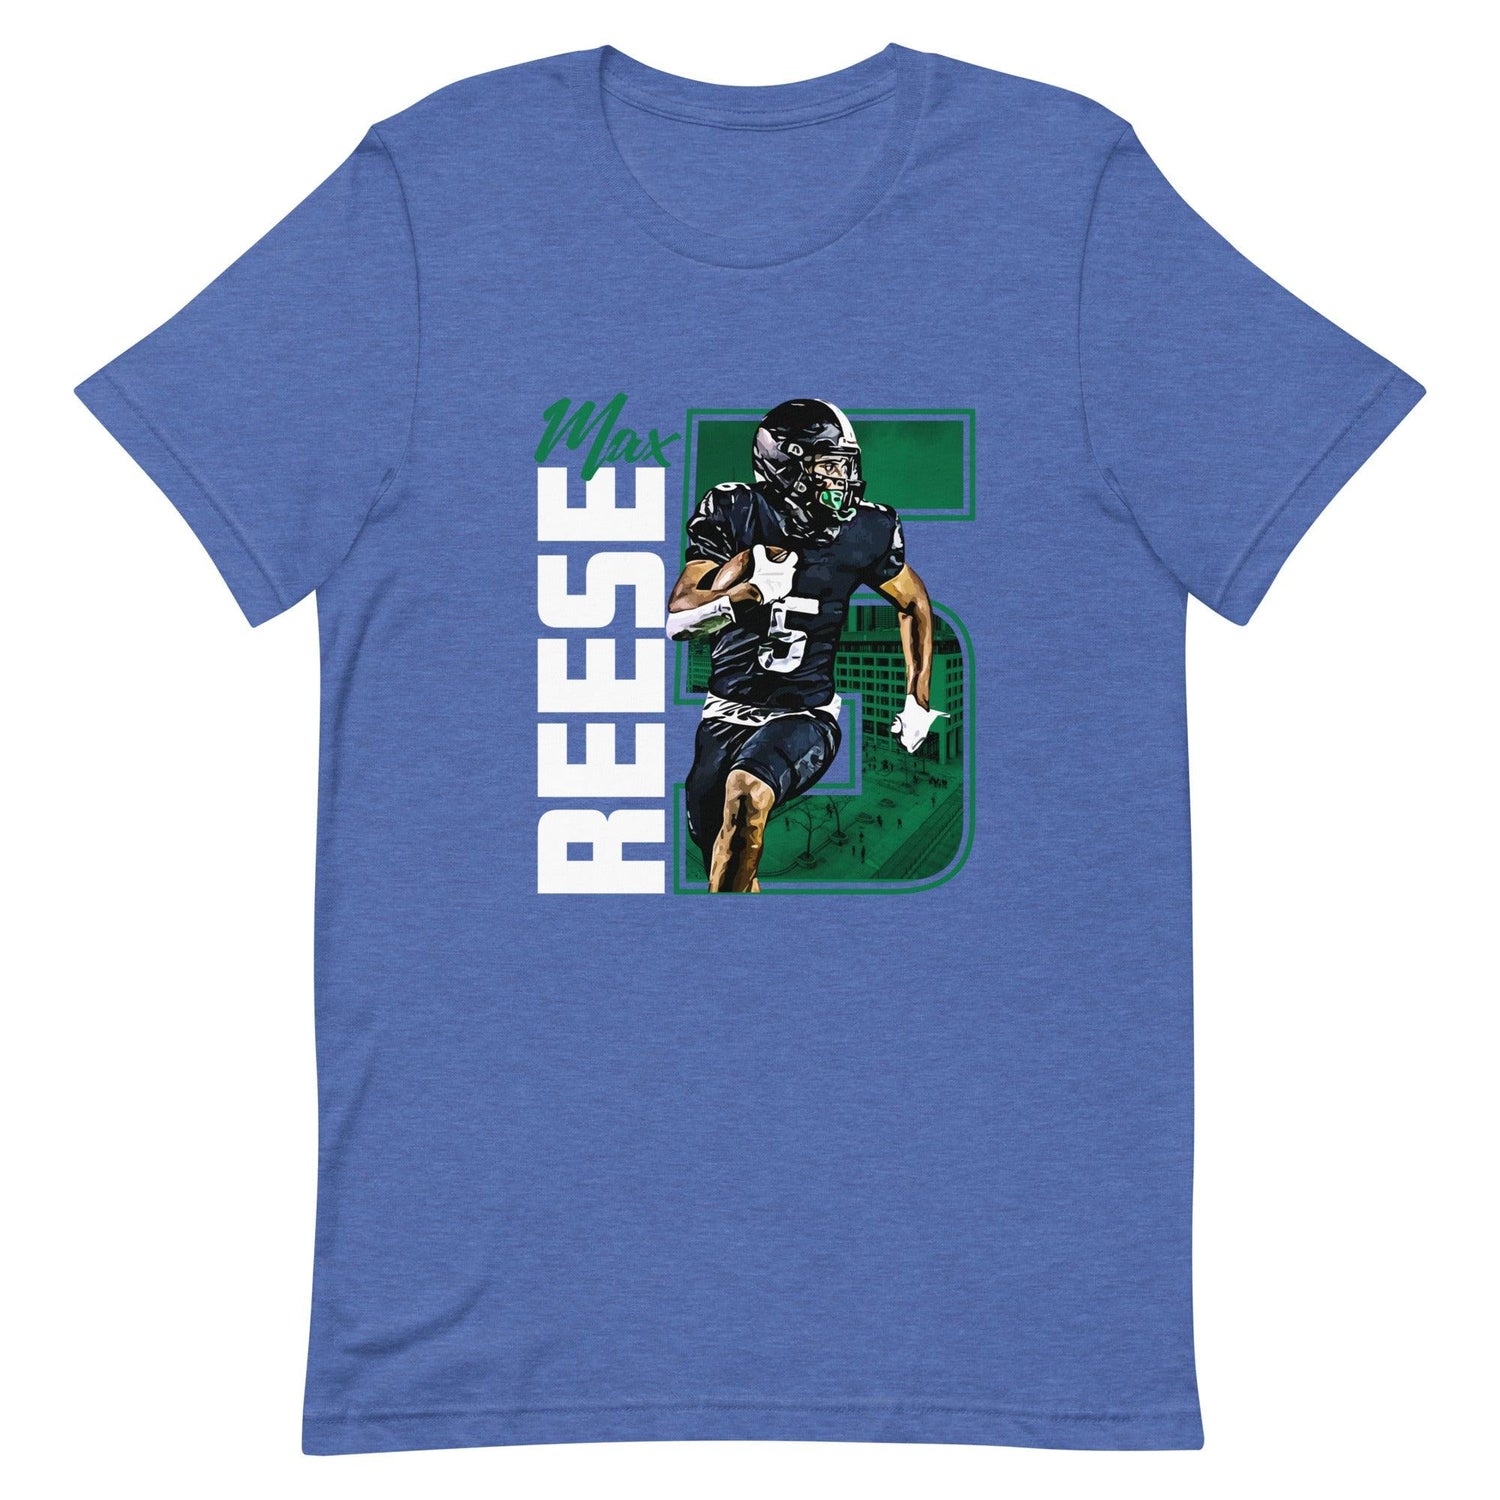 Max Reese "Gameday" t-shirt - Fan Arch